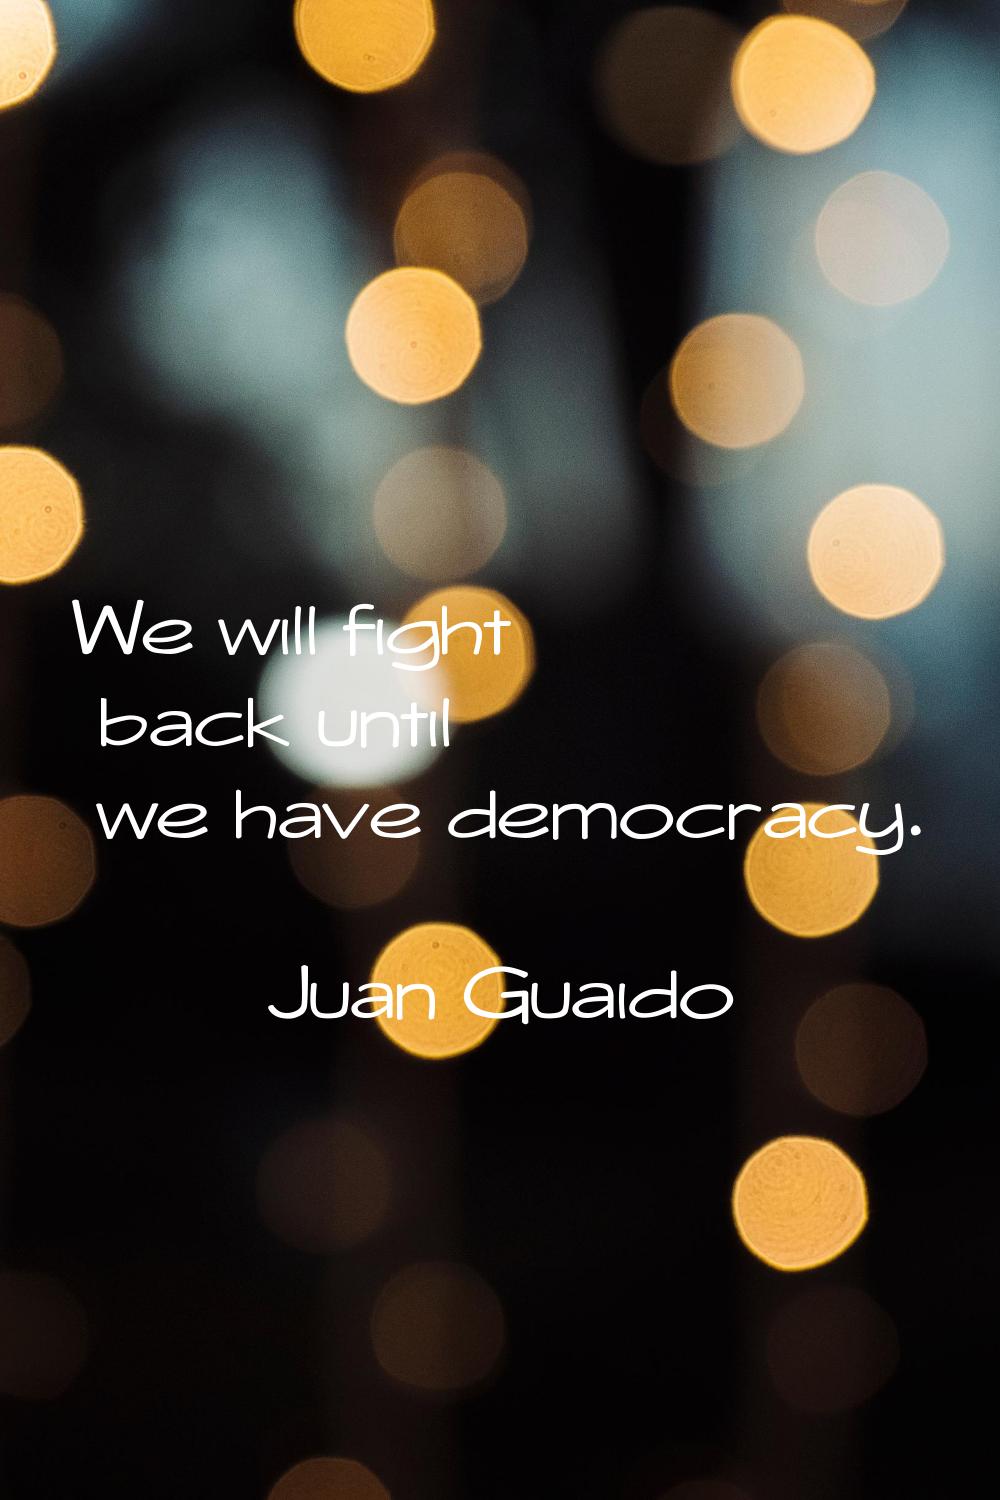 We will fight back until we have democracy.